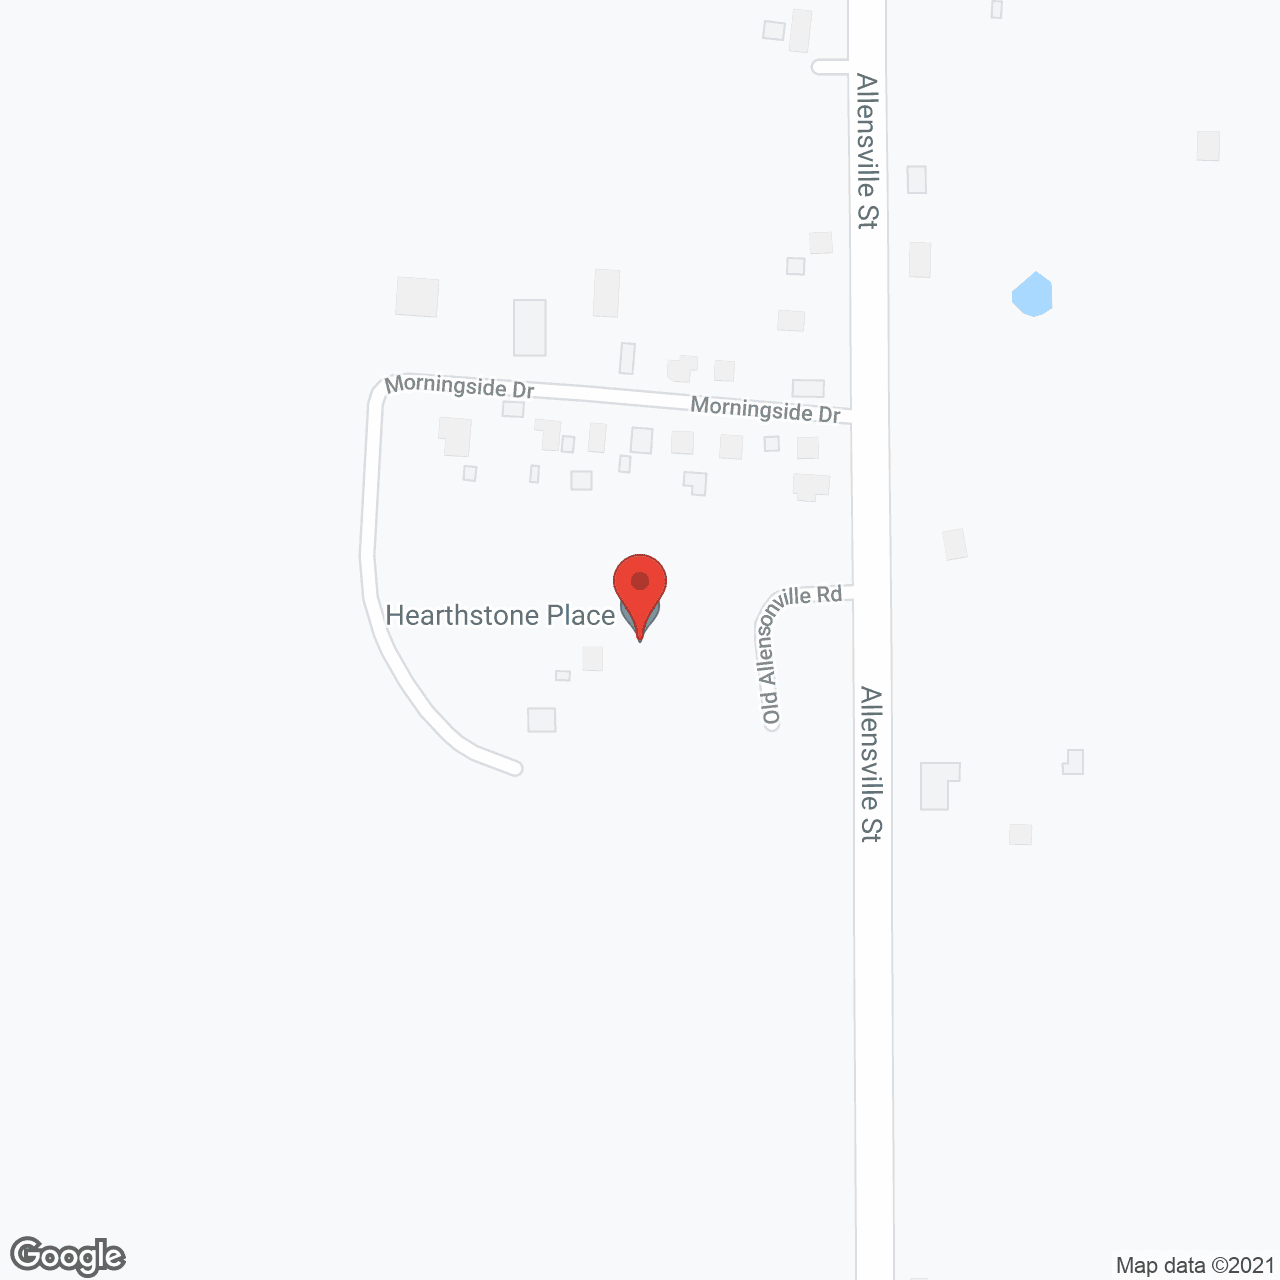 Hearthstone Place in google map